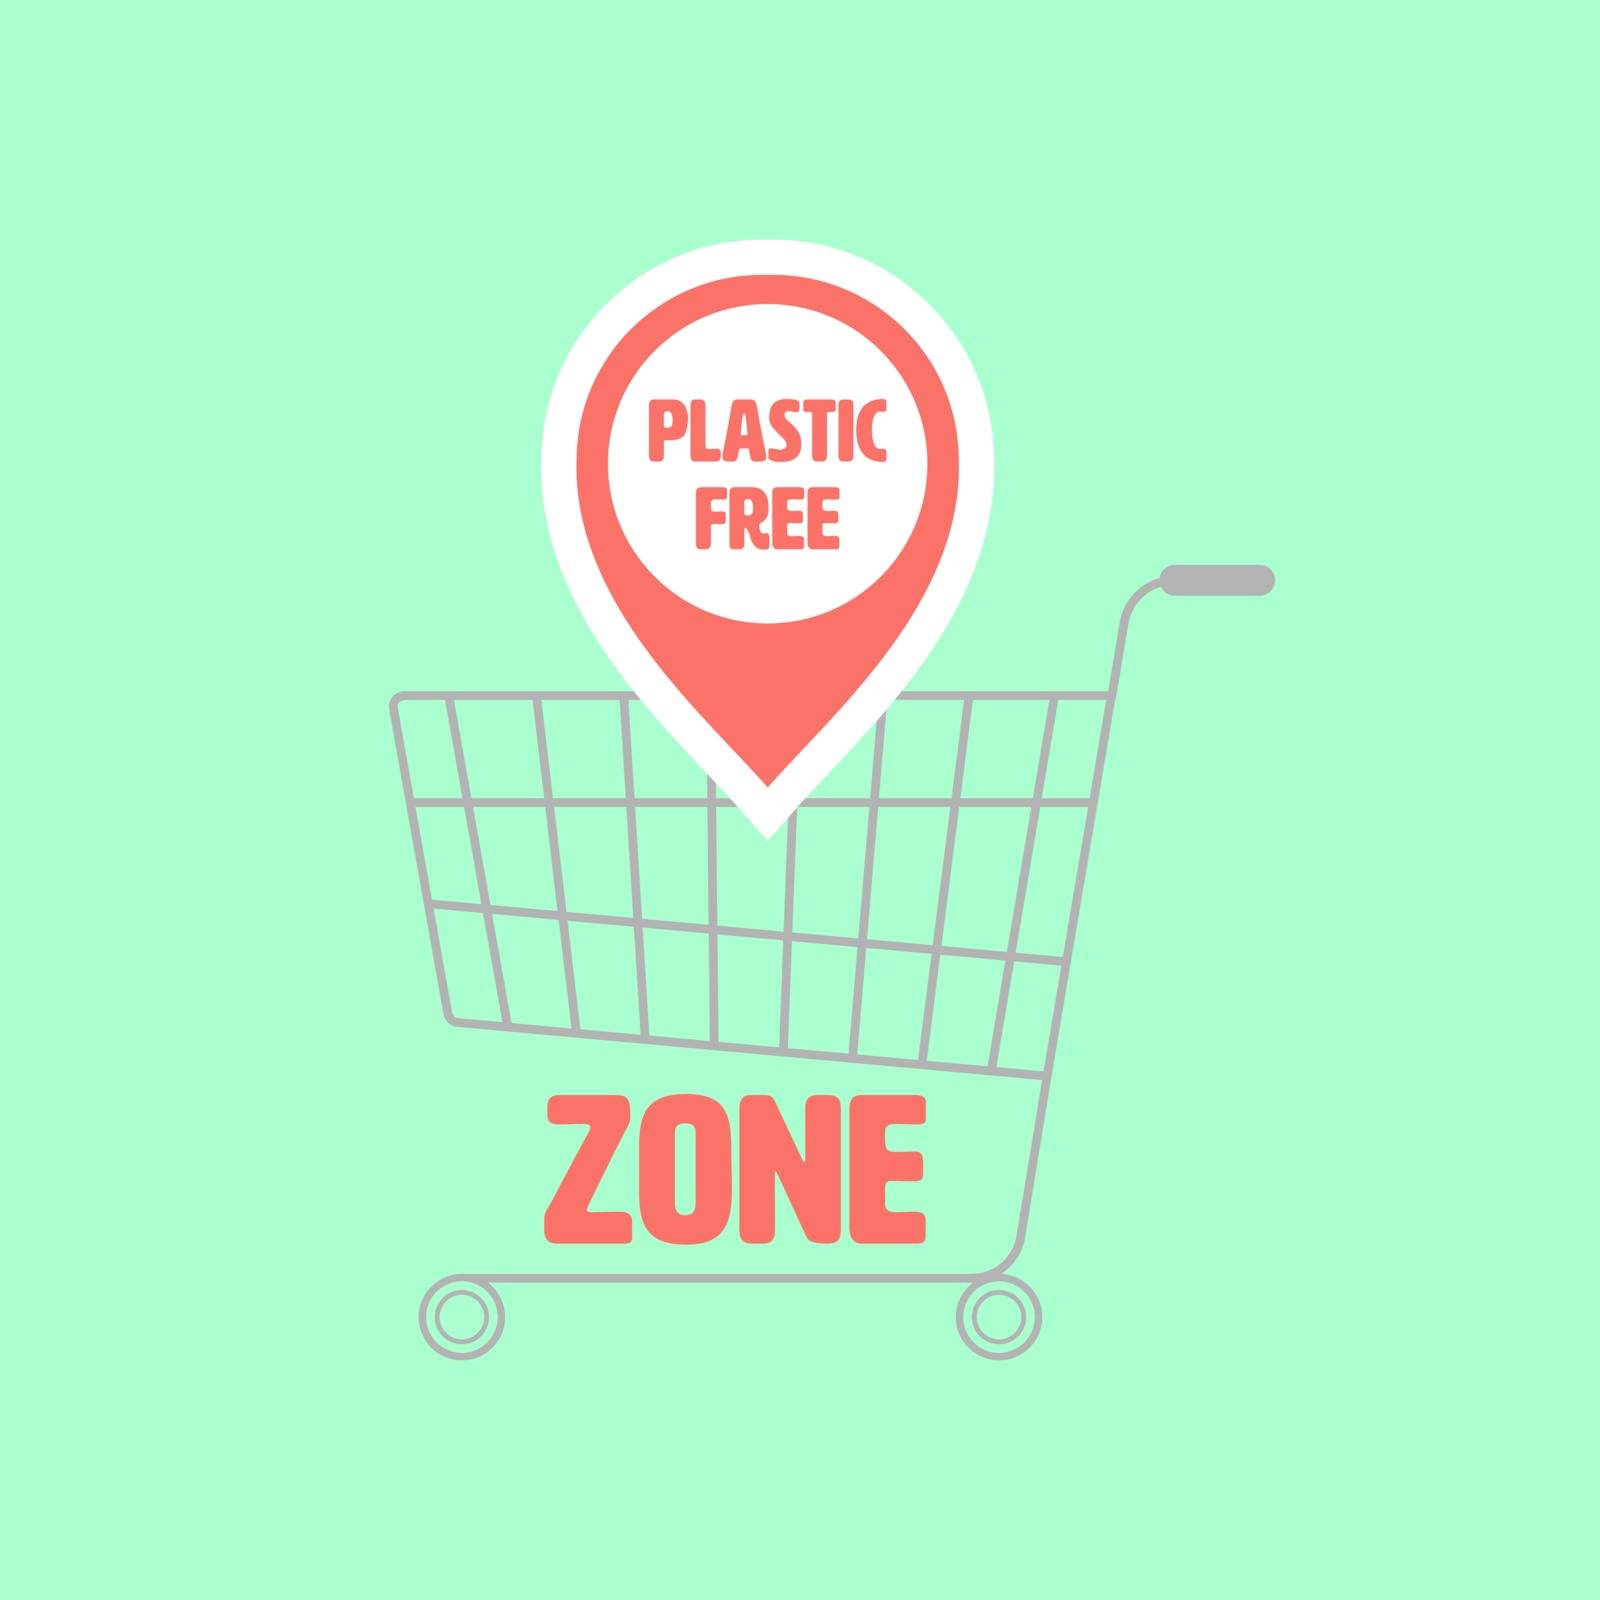 Supermarket trolley symbol with location icon and typographic design. Plastic free zone concept. Vector illustration.